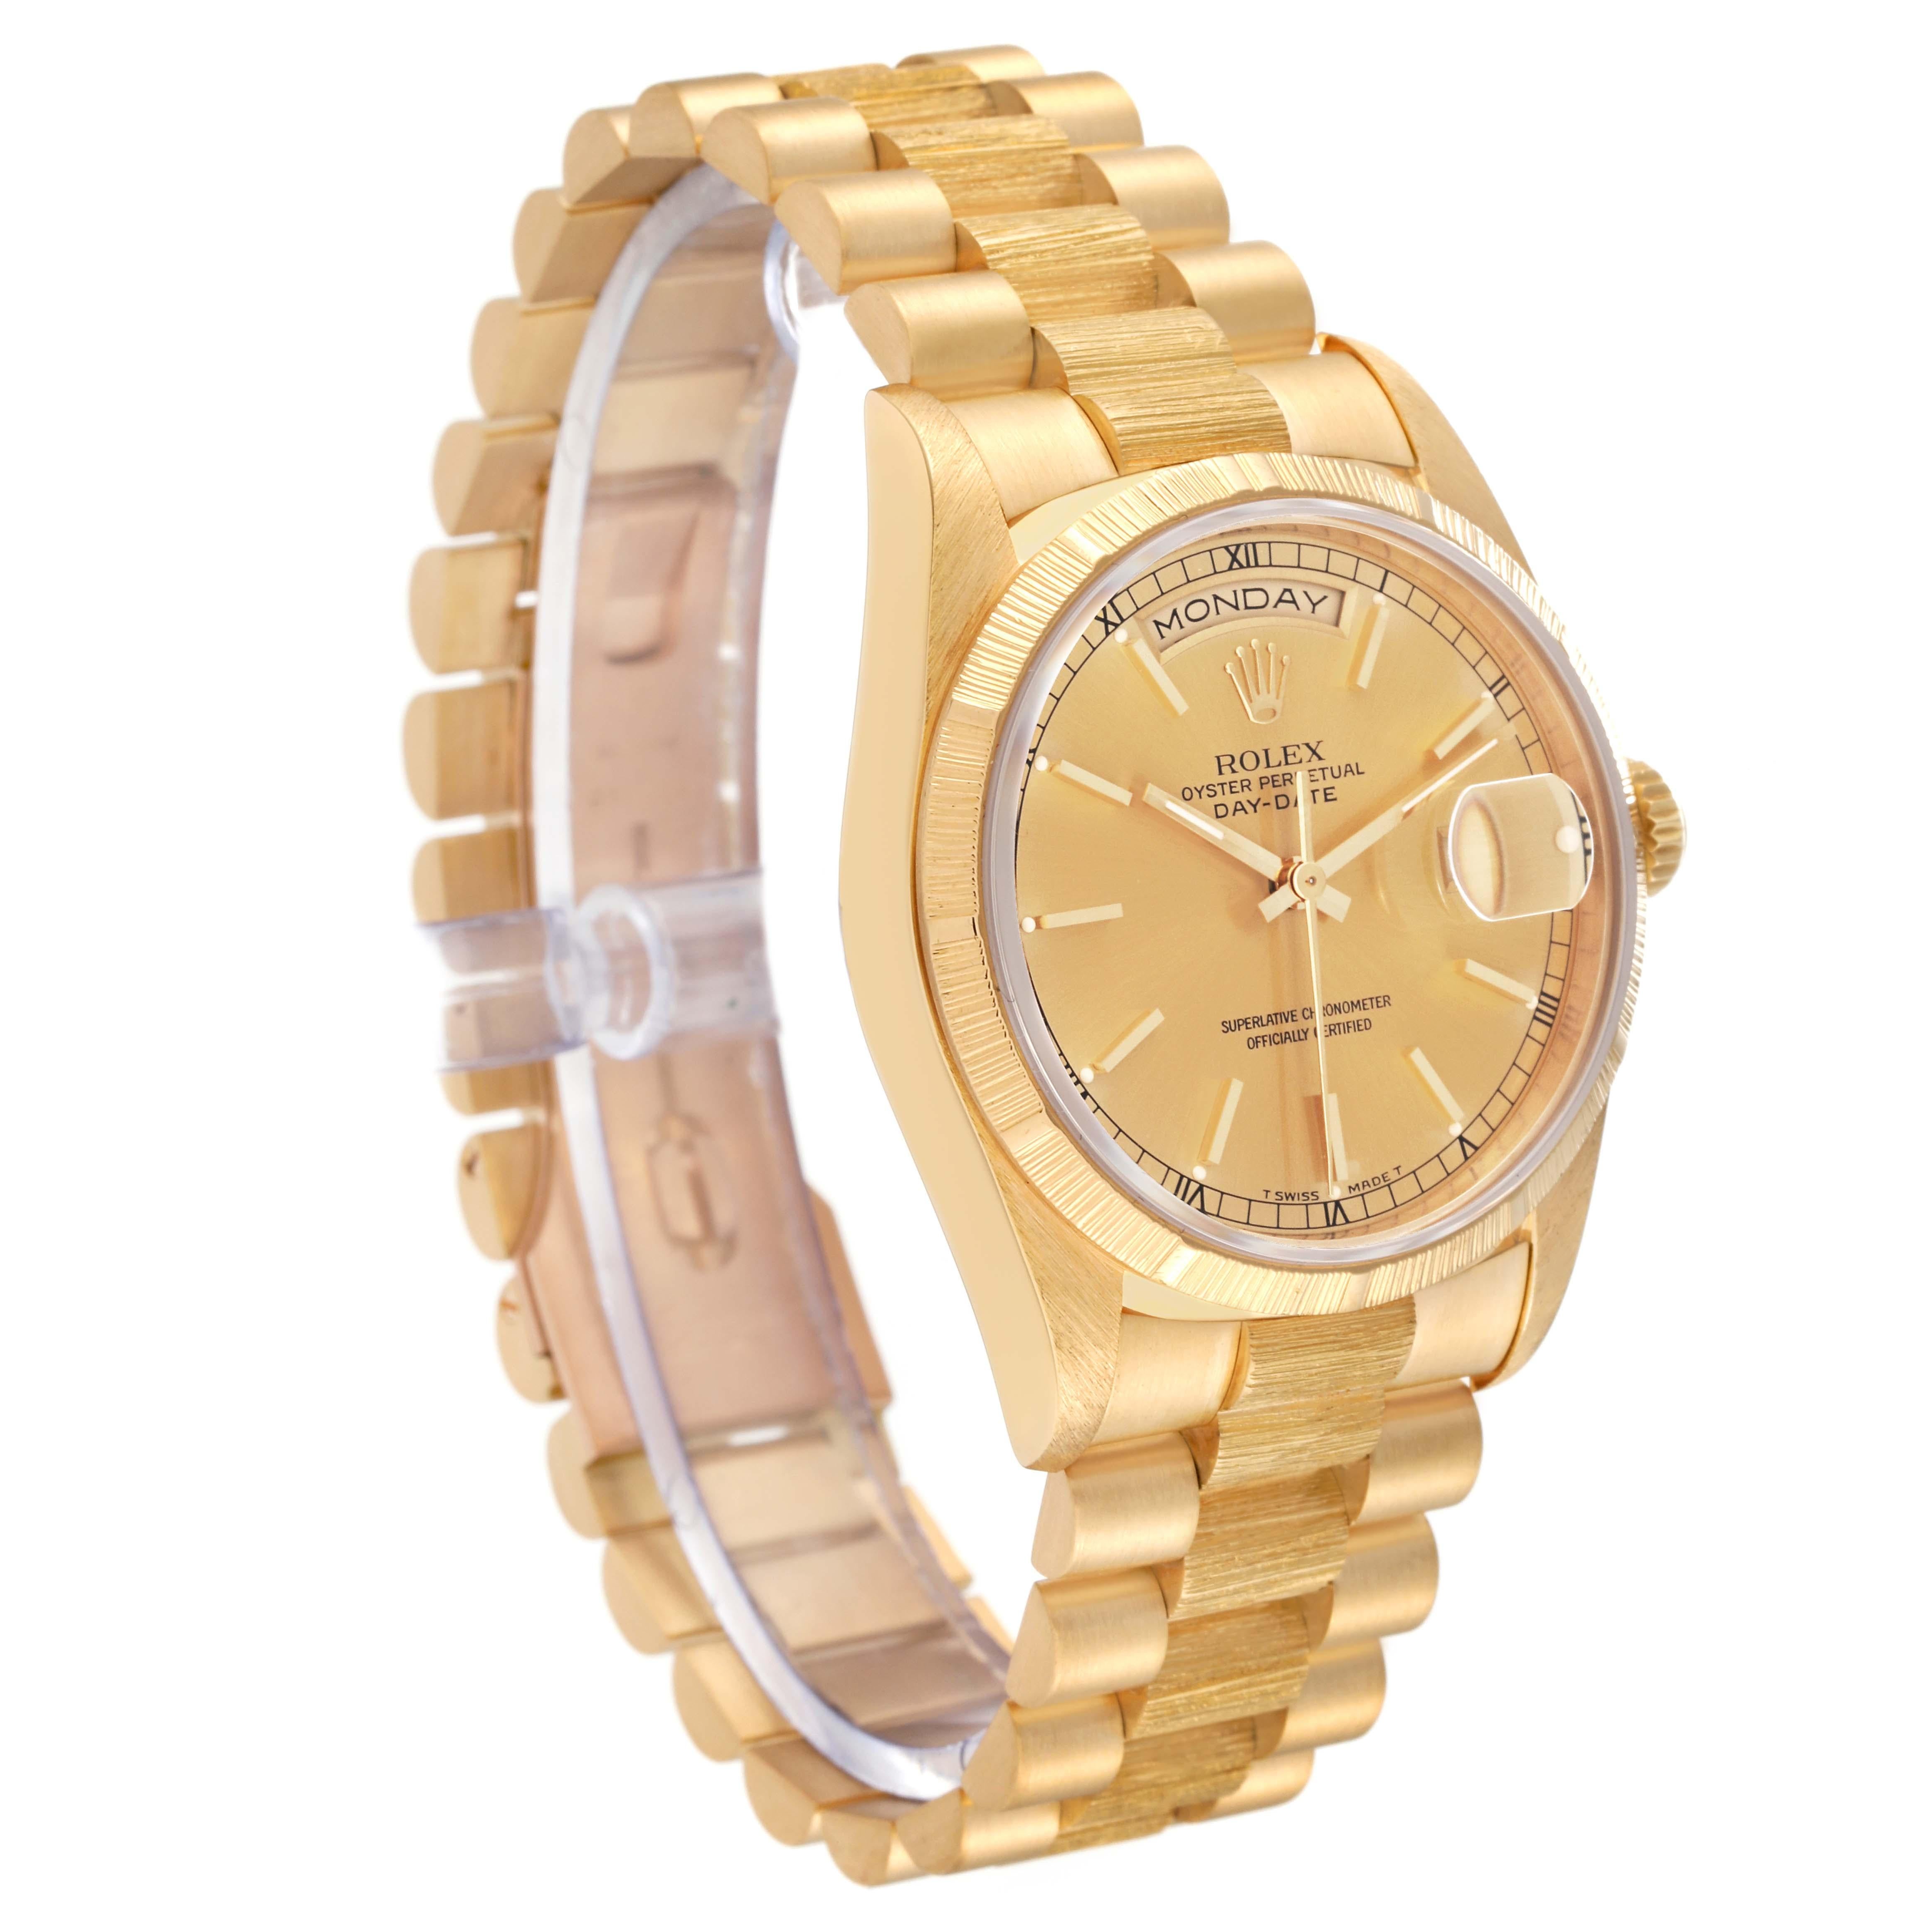 Rolex Day-Date President Yellow Gold Bark Finish Mens Watch 18248 2